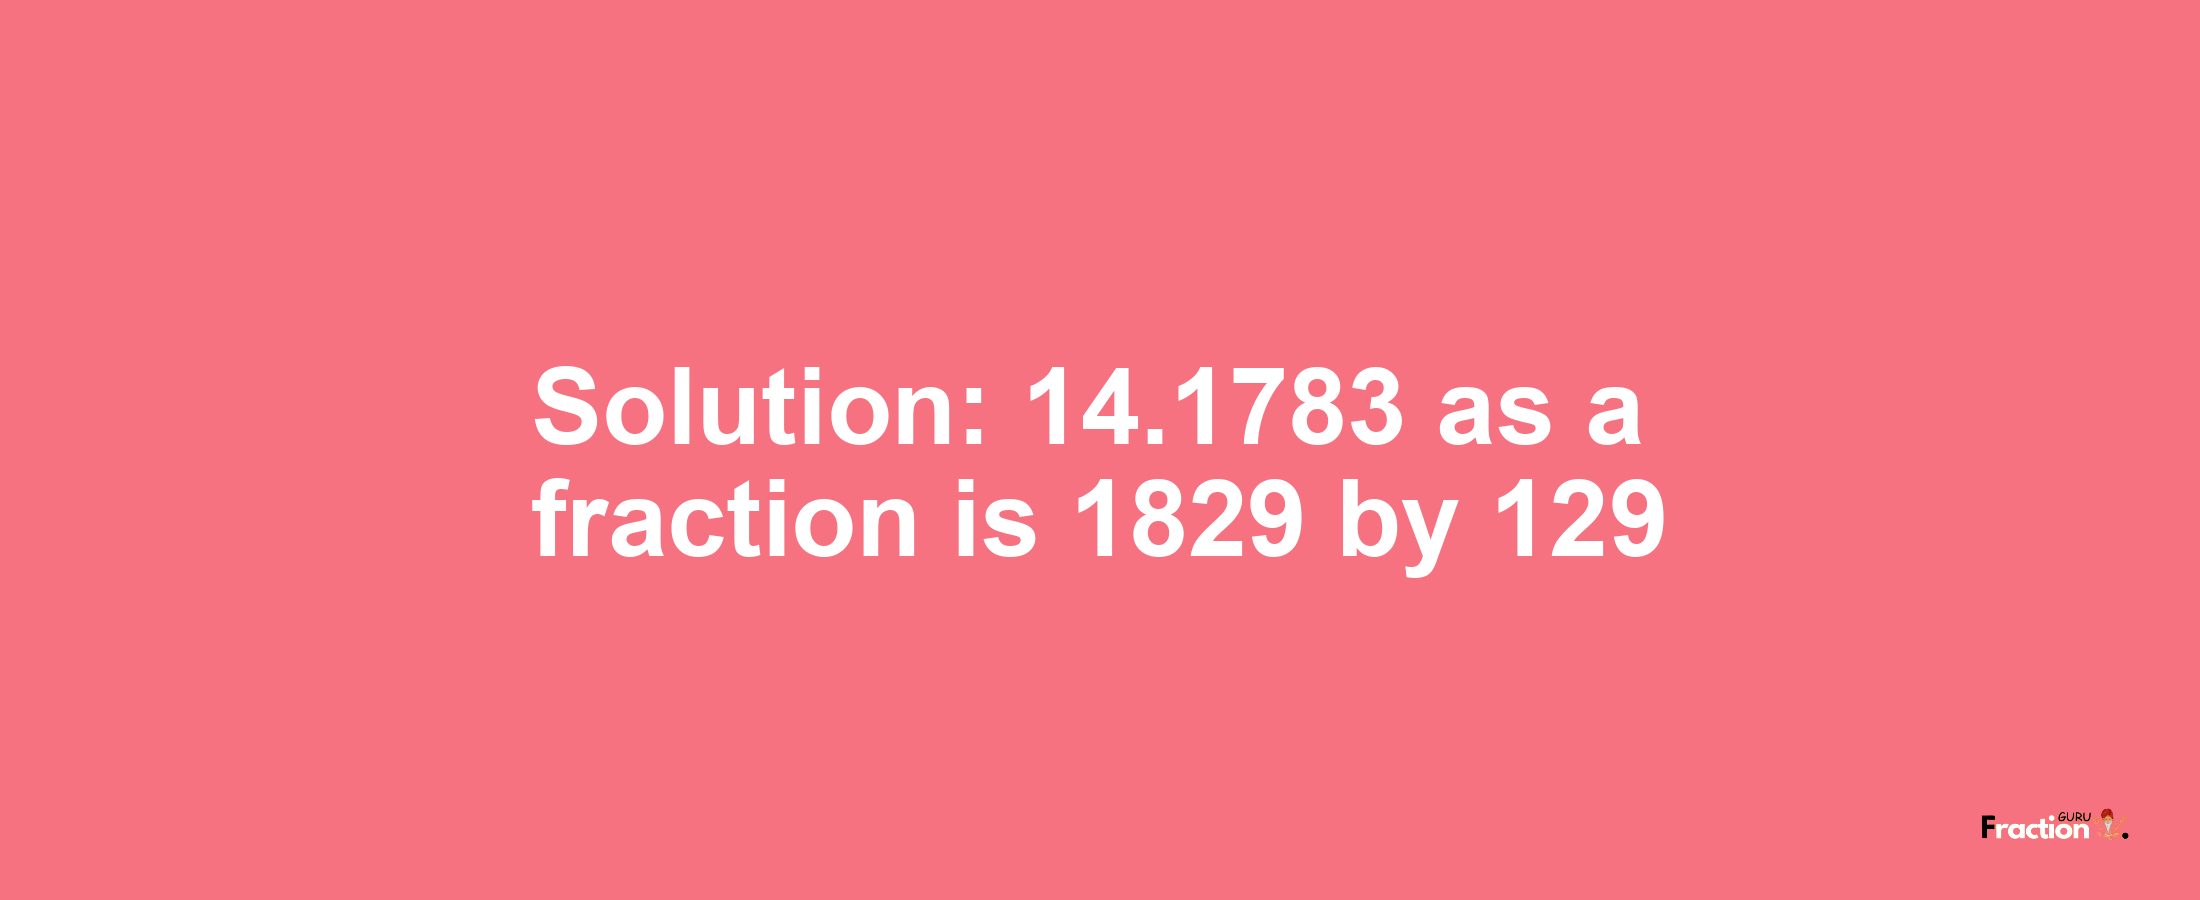 Solution:14.1783 as a fraction is 1829/129